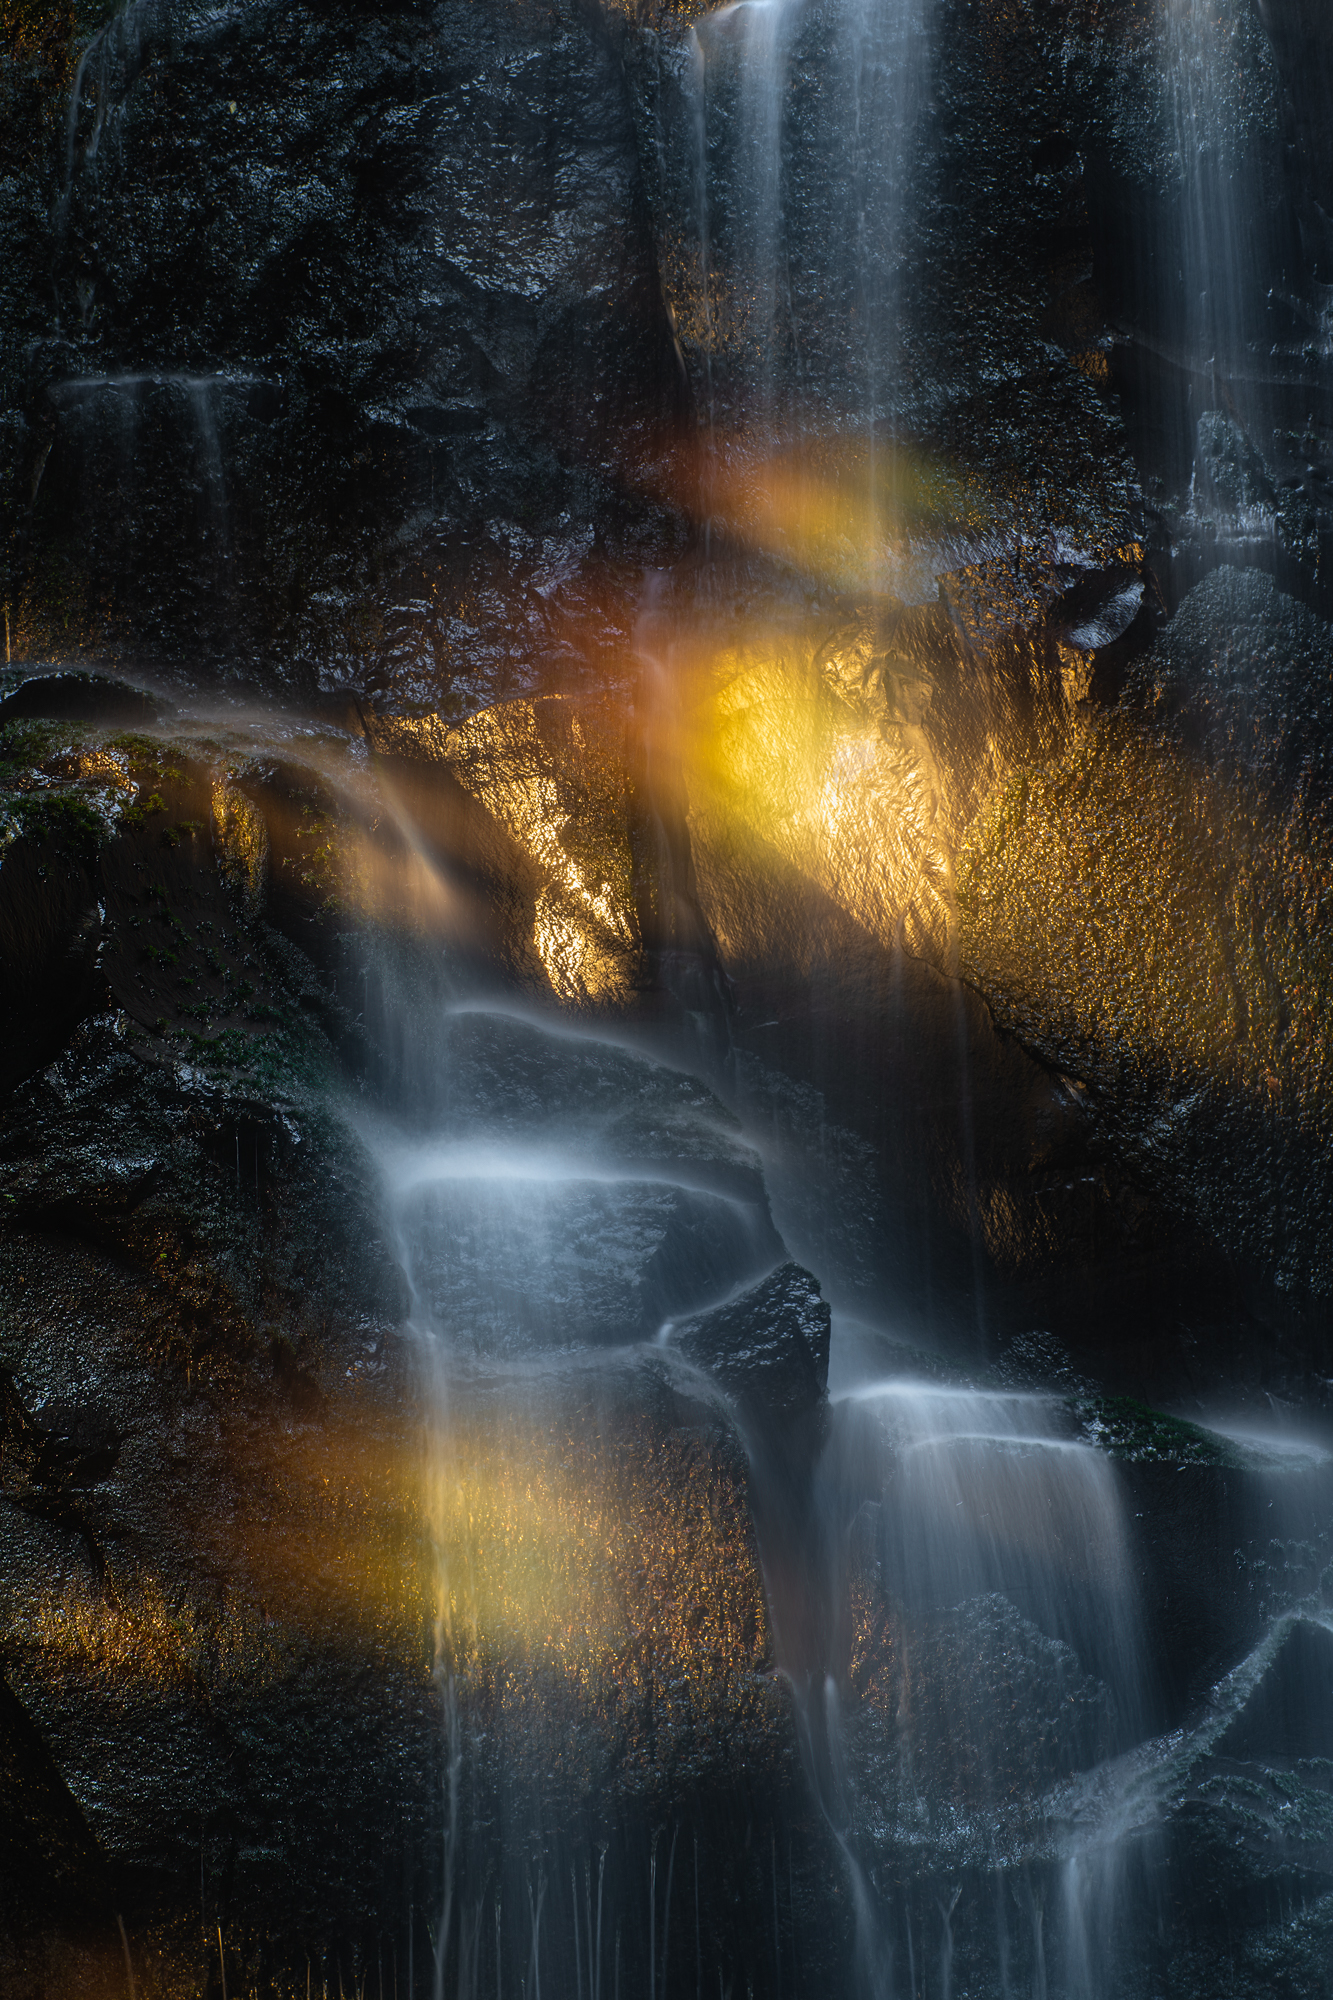 The final moments of sunset shine through a forest and cast pockets of warm sunlight onto a small waterfall in the Pacific Northwest